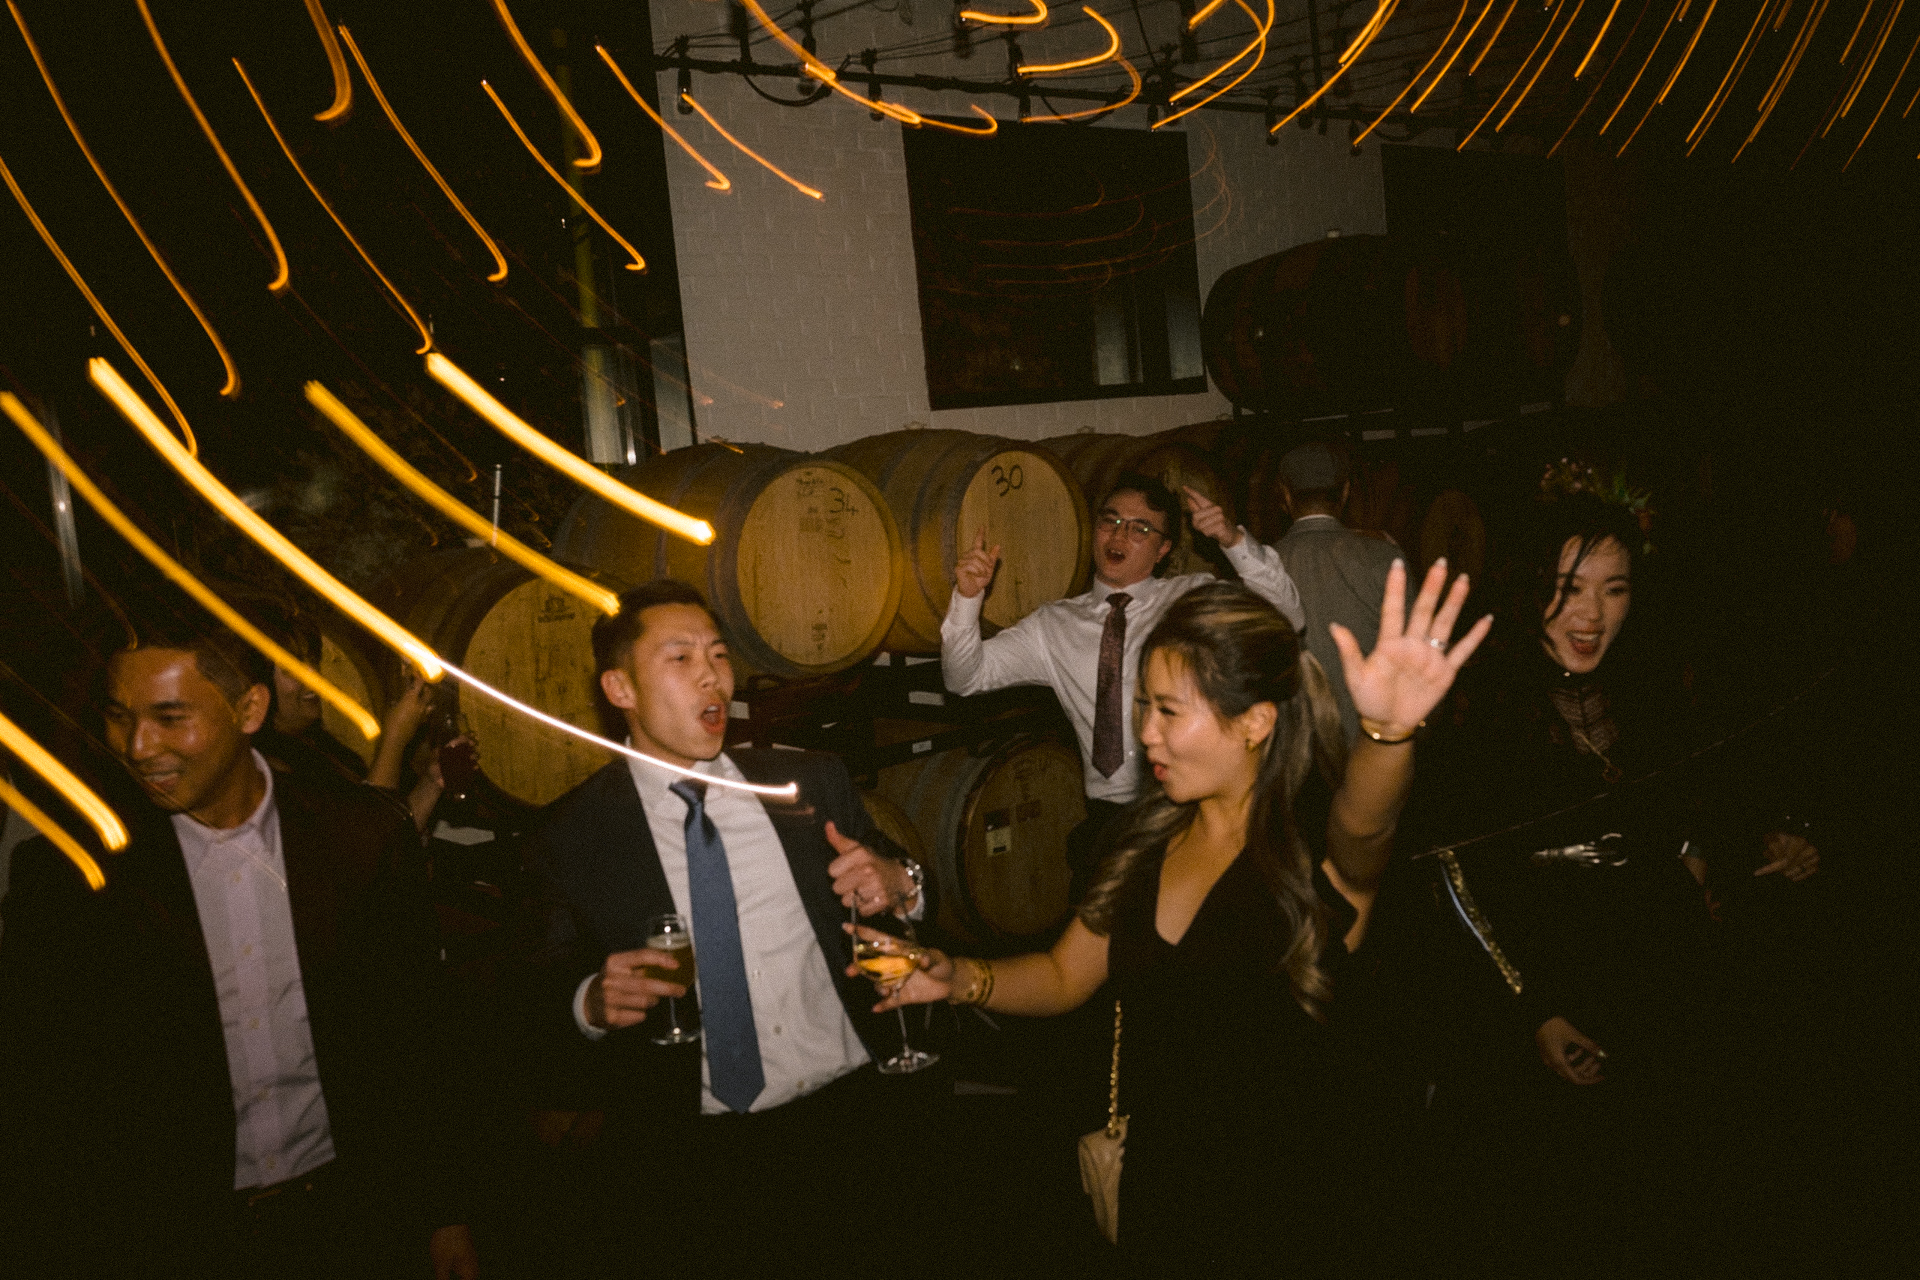 A group of people celebrating and dancing in a dimly lit room with decorative lights and barrels in the background.